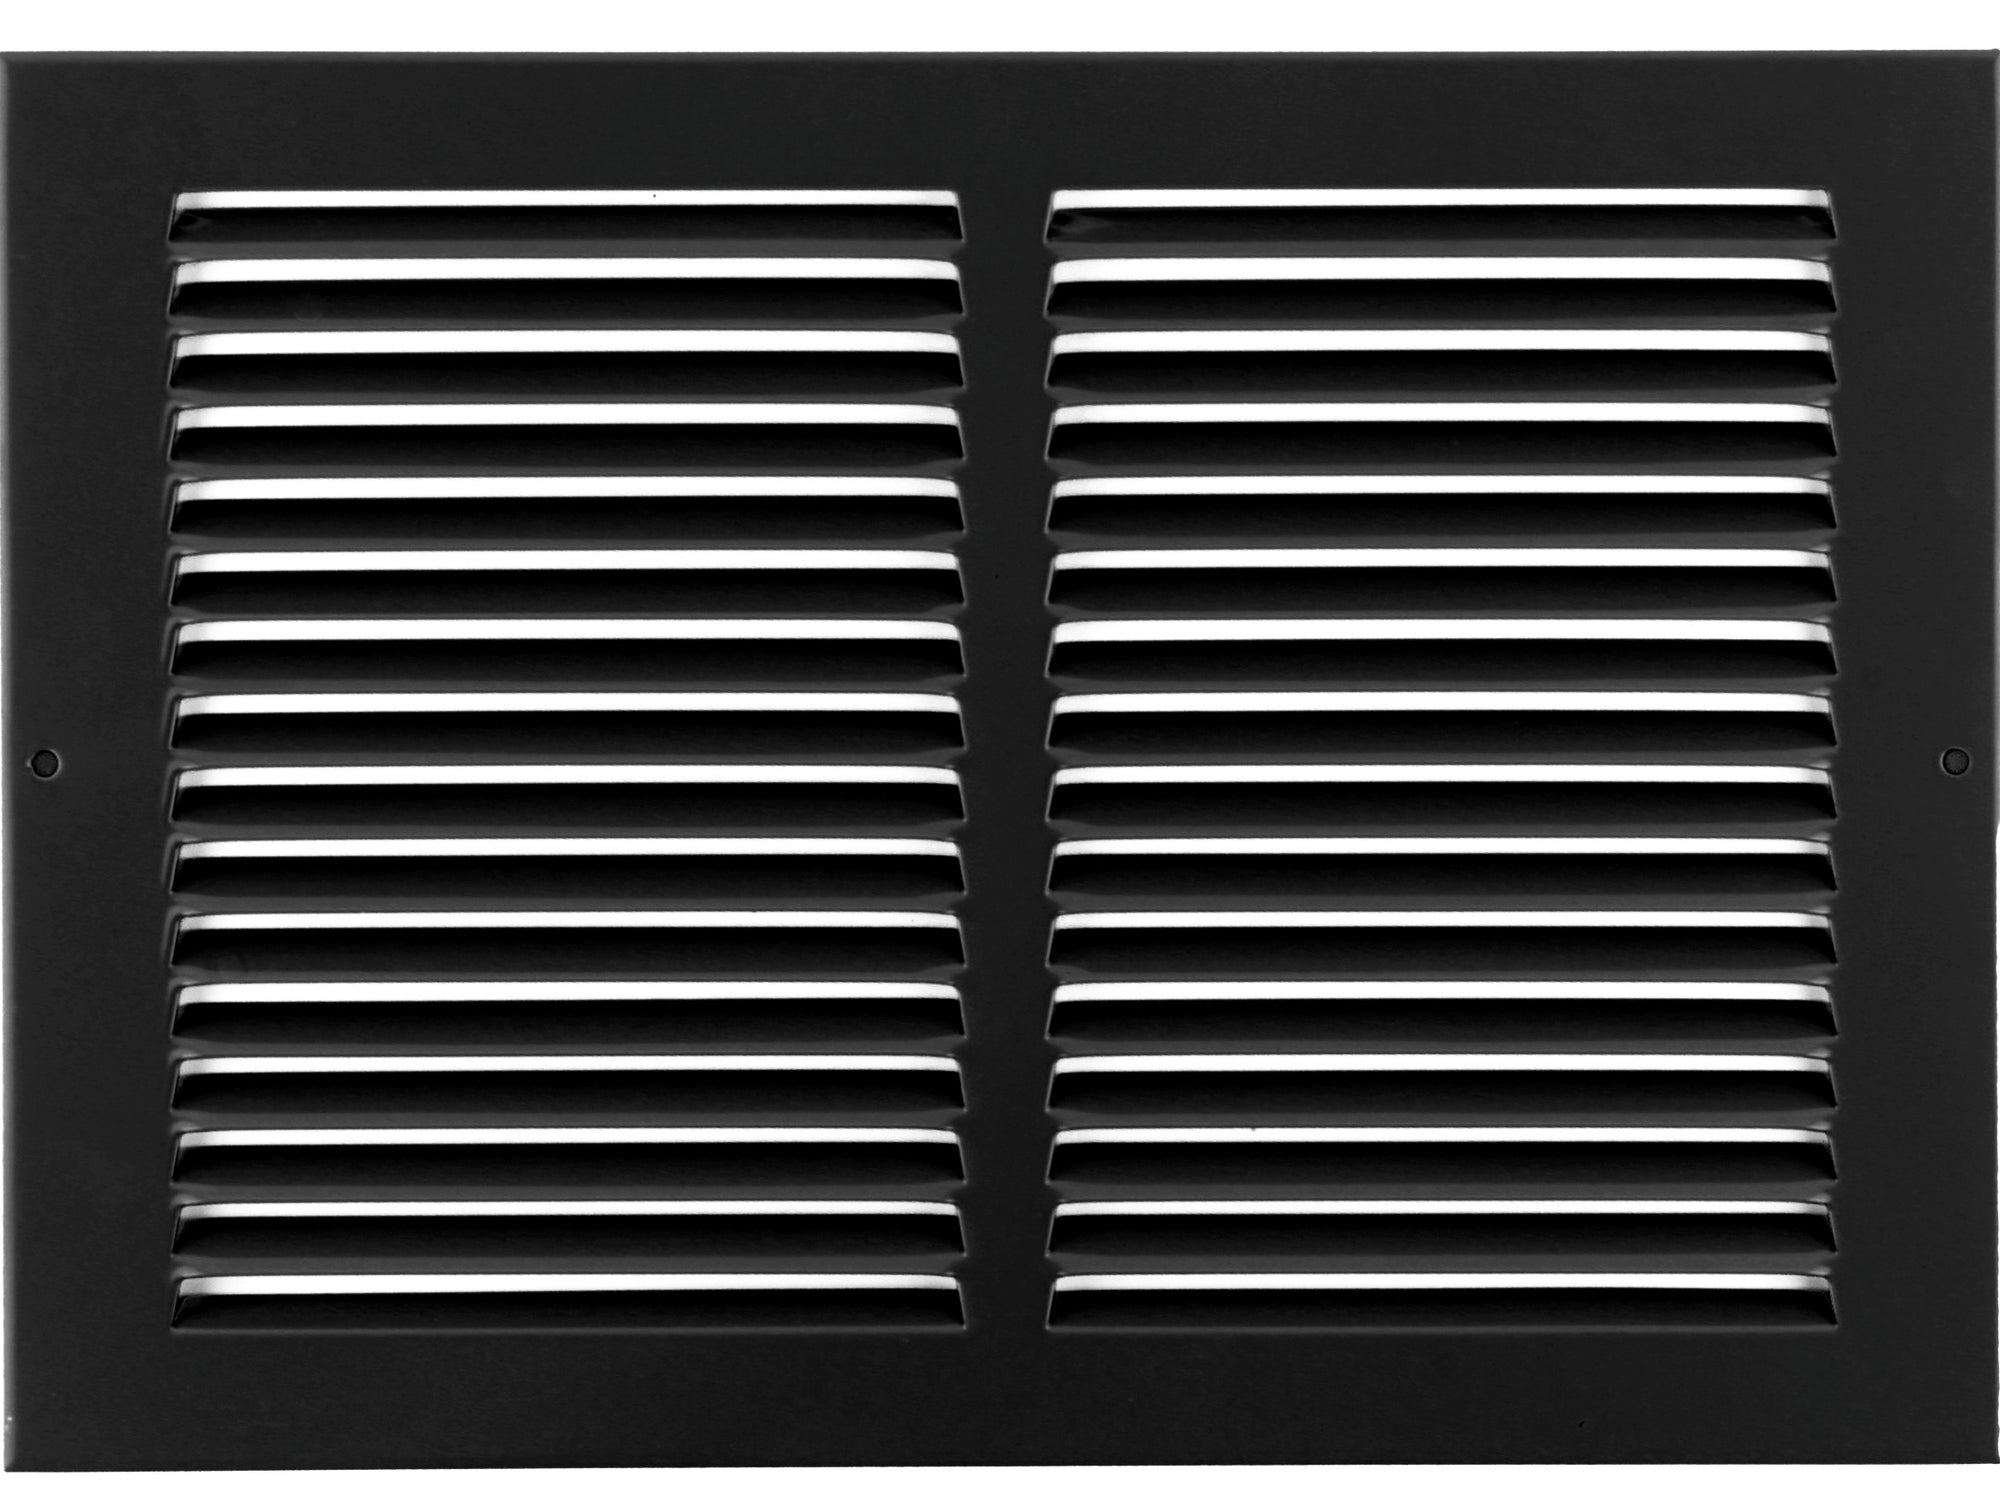 12" X 10" Air Vent Return Grilles - Sidewall and Ceiling - Steel